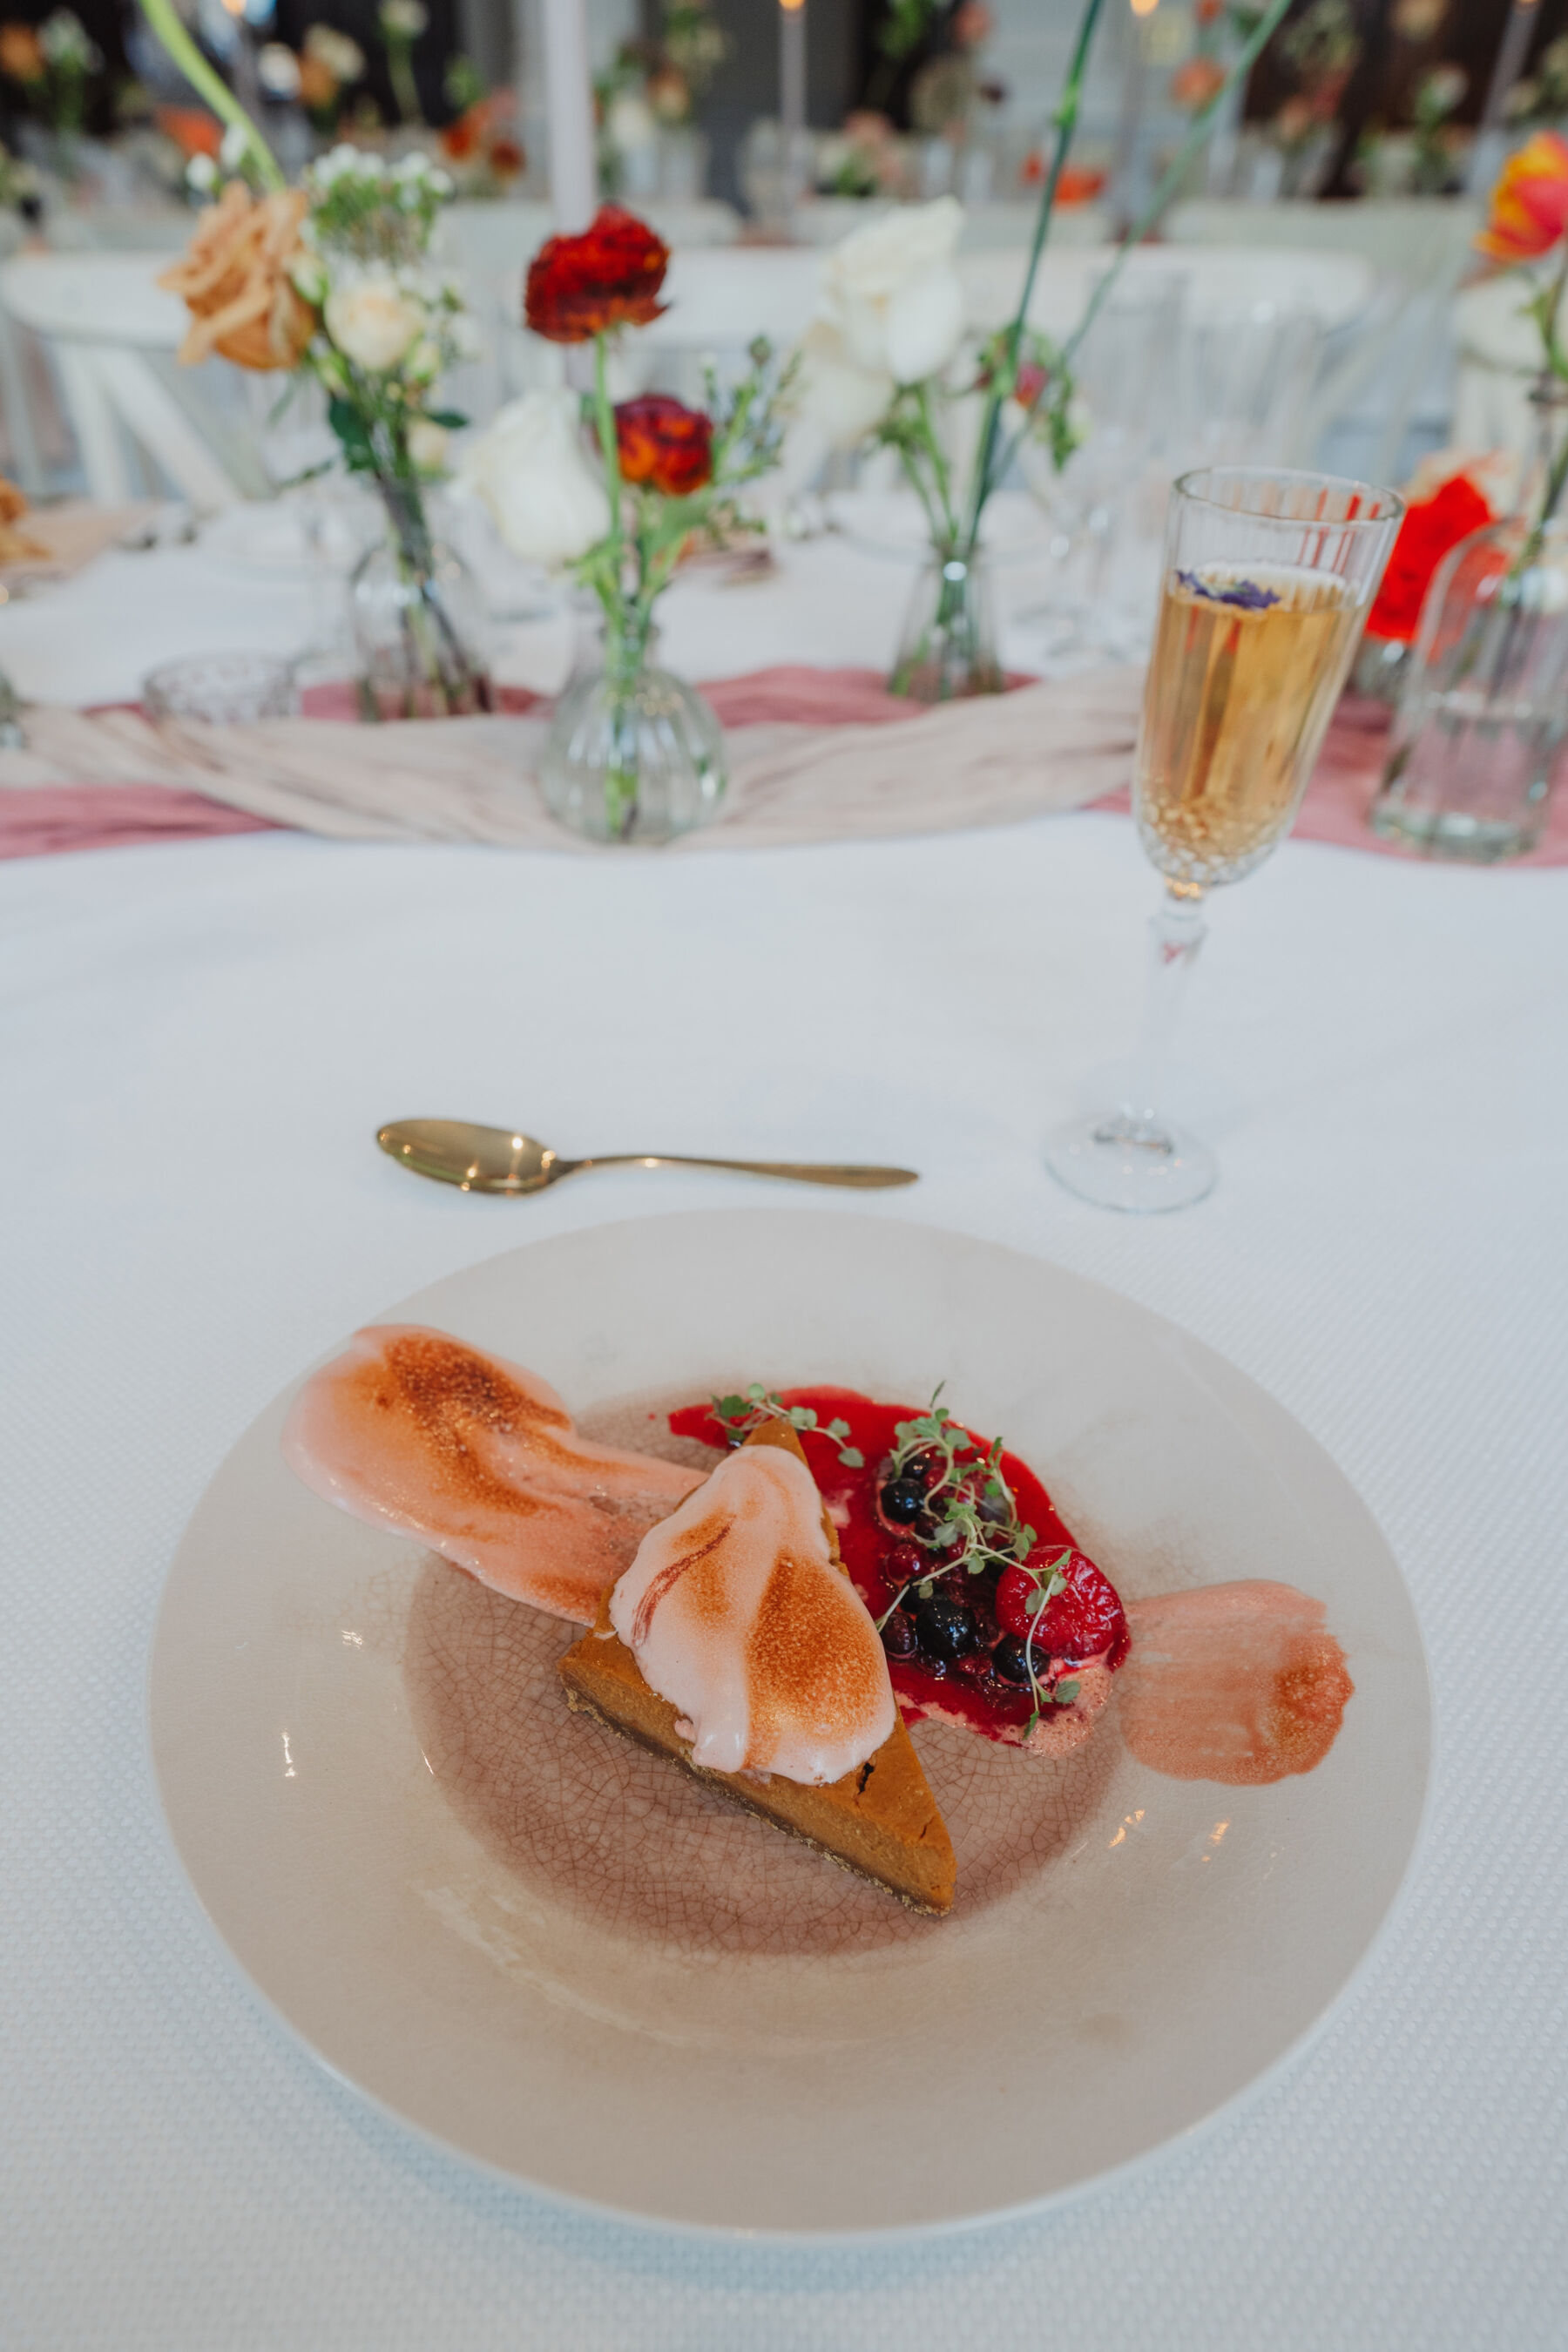 Sustainable vegan and plant based wedding food served at 41 Portland Place wedding venue, London.